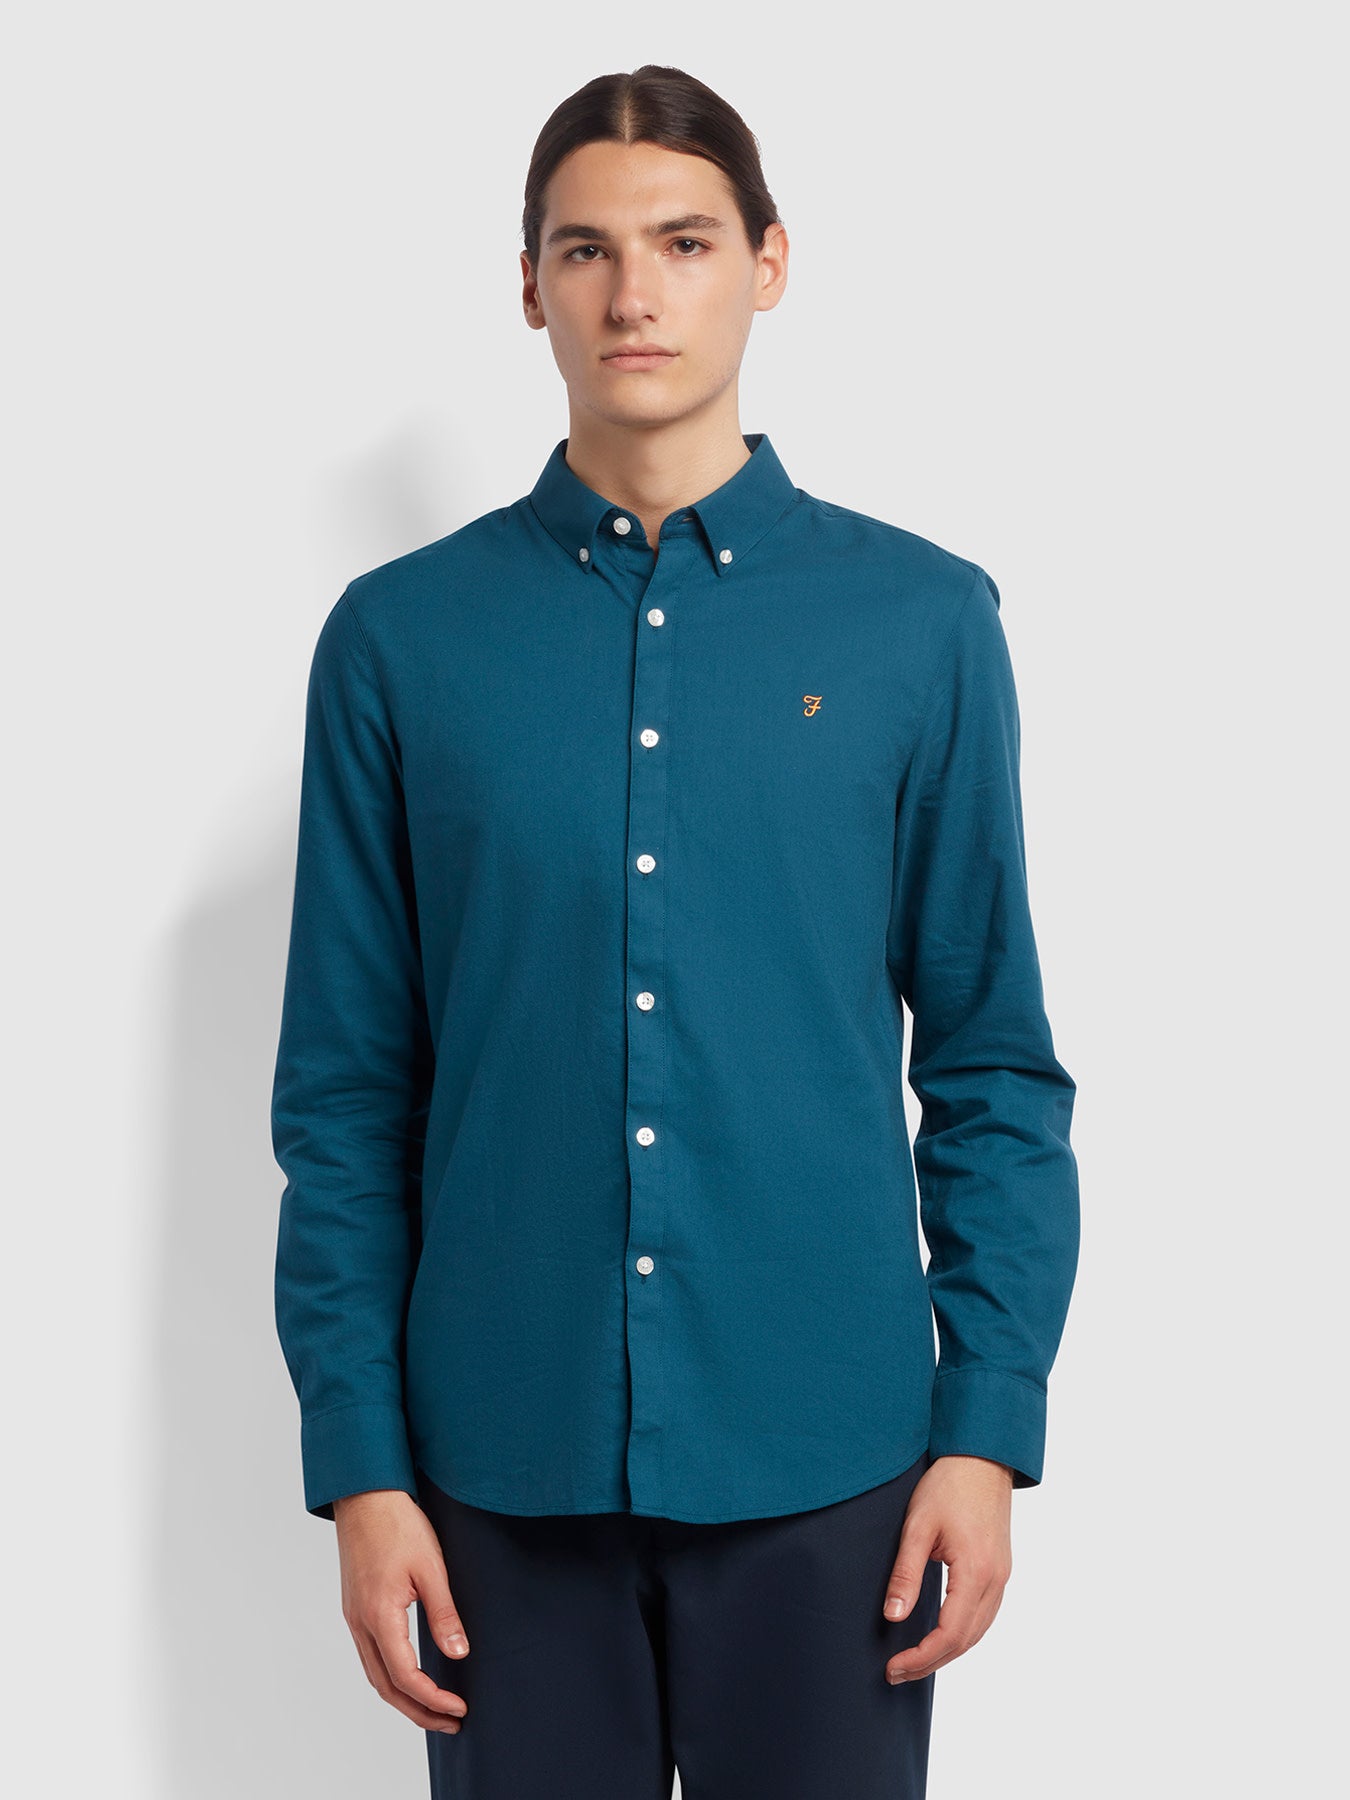 View Brewer Slim Fit Organic Cotton Oxford Shirt In Atlantic information